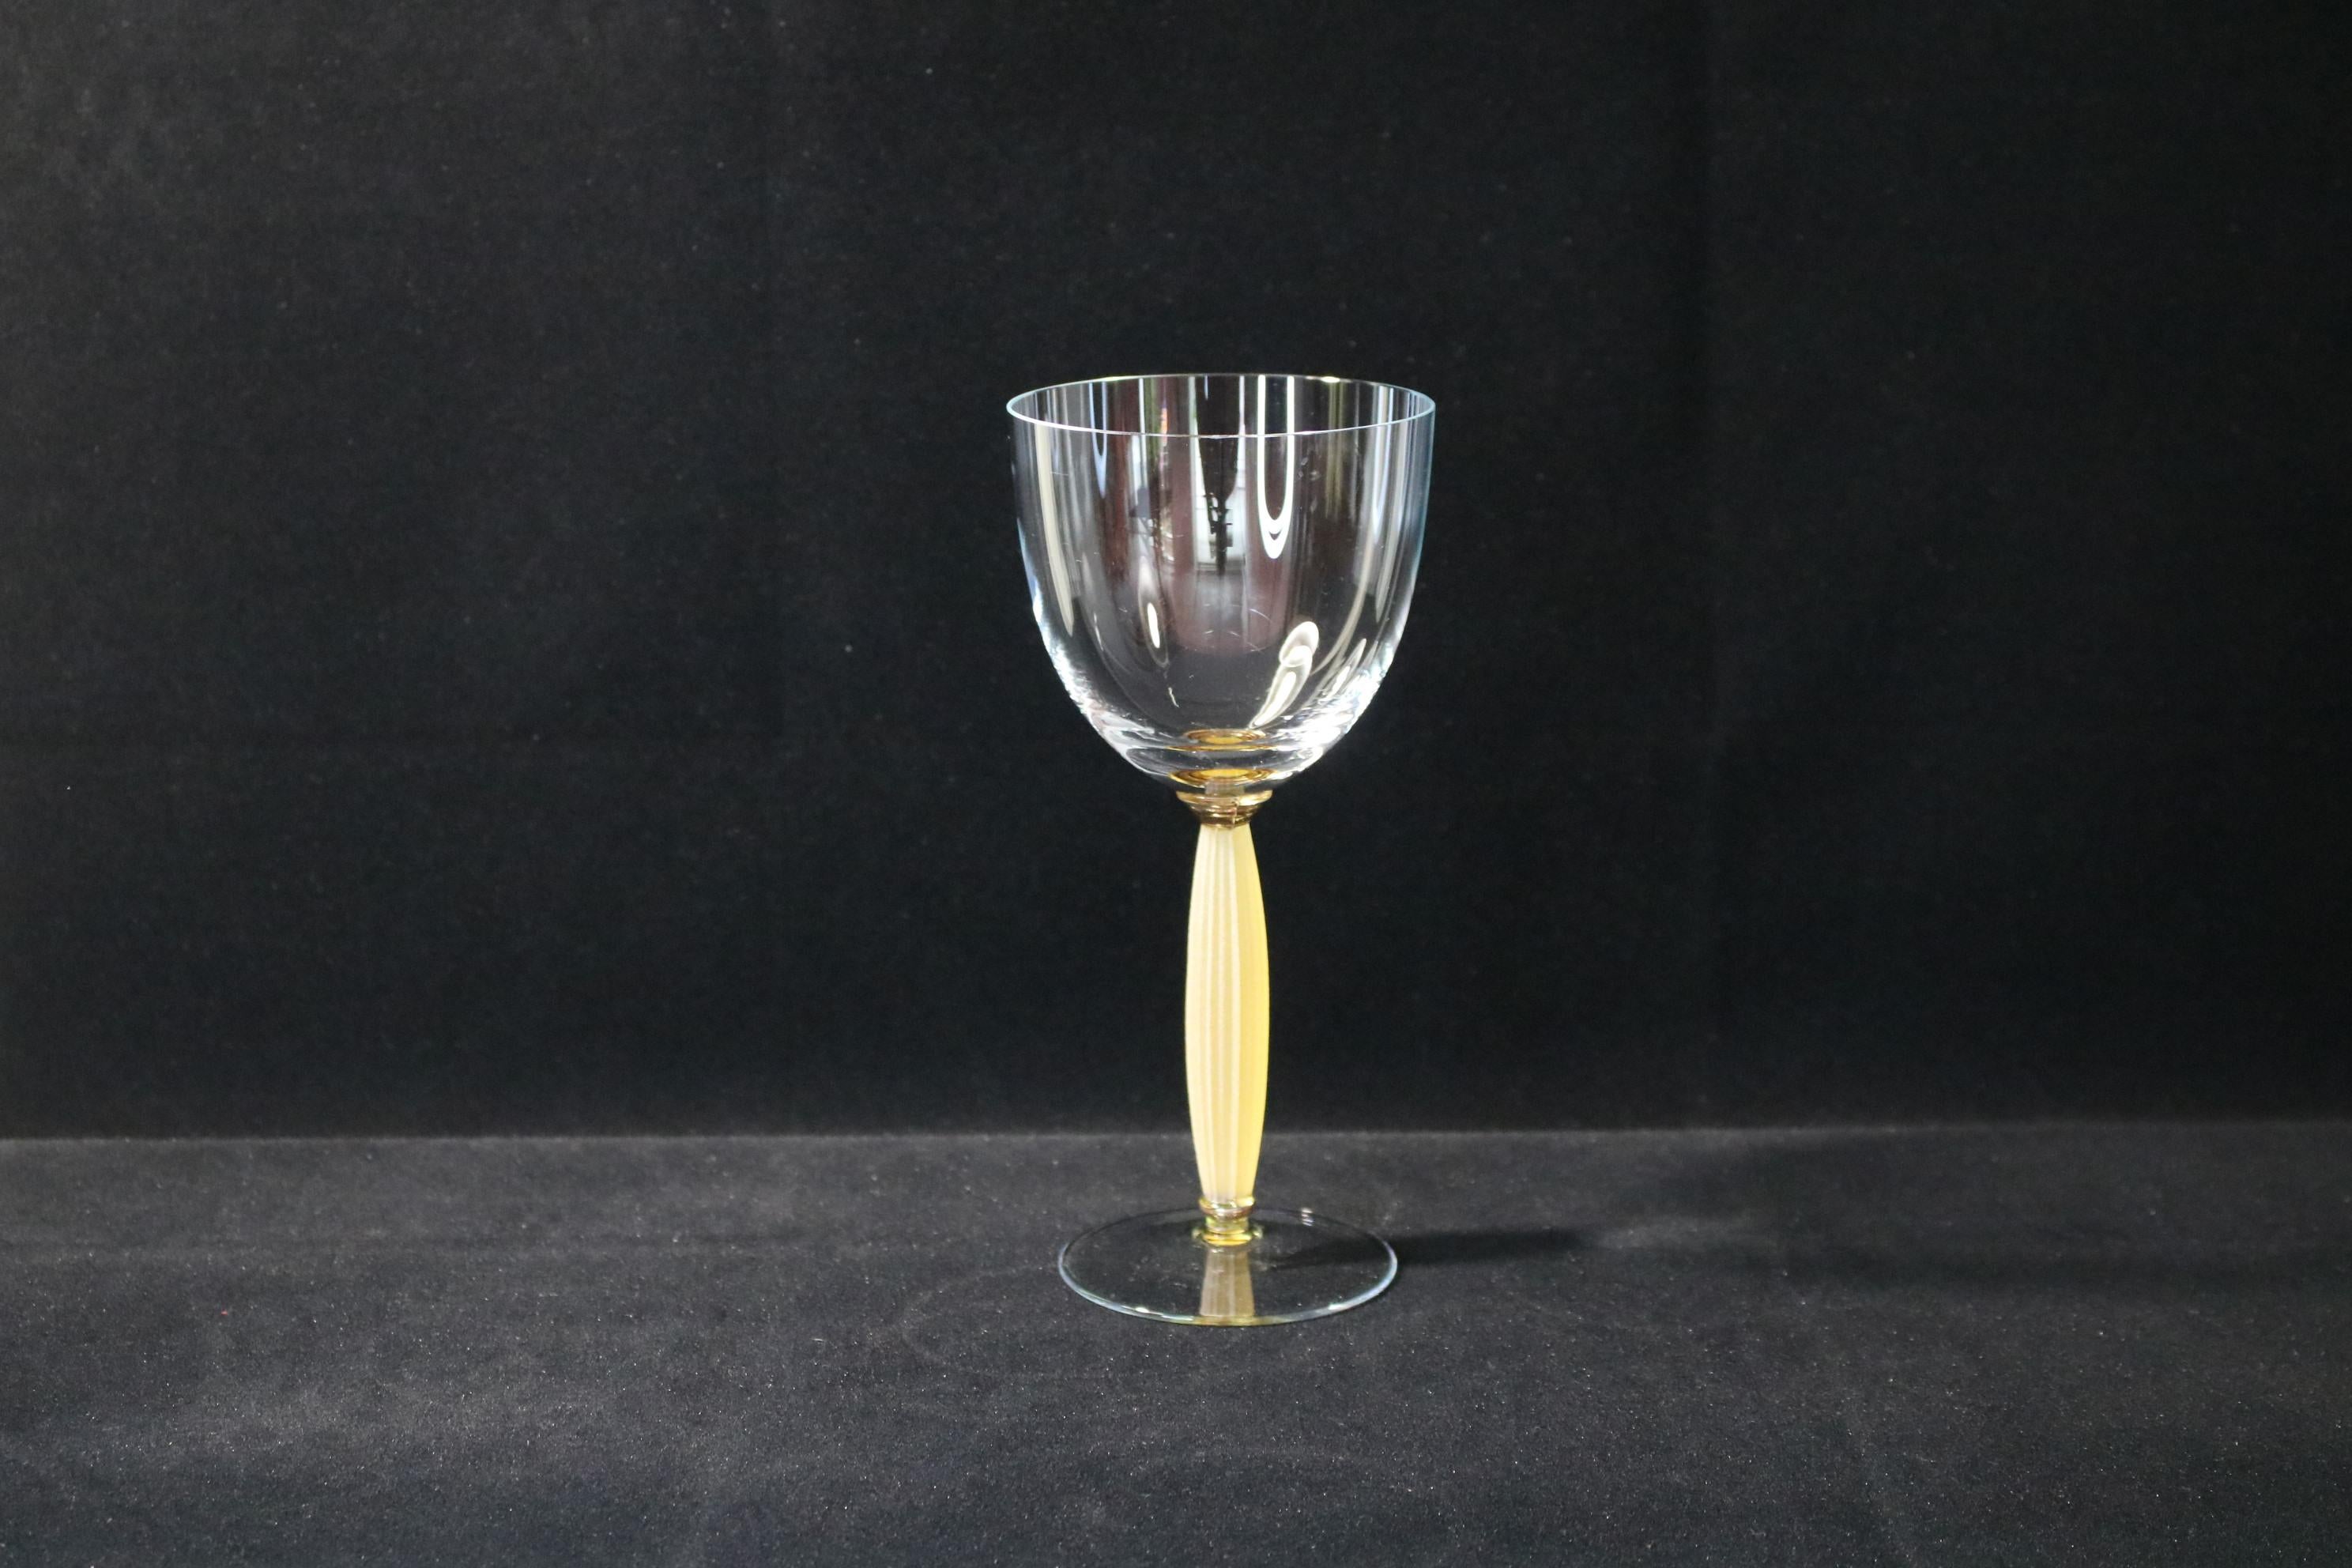 A beautiful and one of a kind set of 10 wine glasses. These were a part of a prototype production run, we were able to save these 10 pieces as the rest was destroyed. The material is sodium potassium glass.